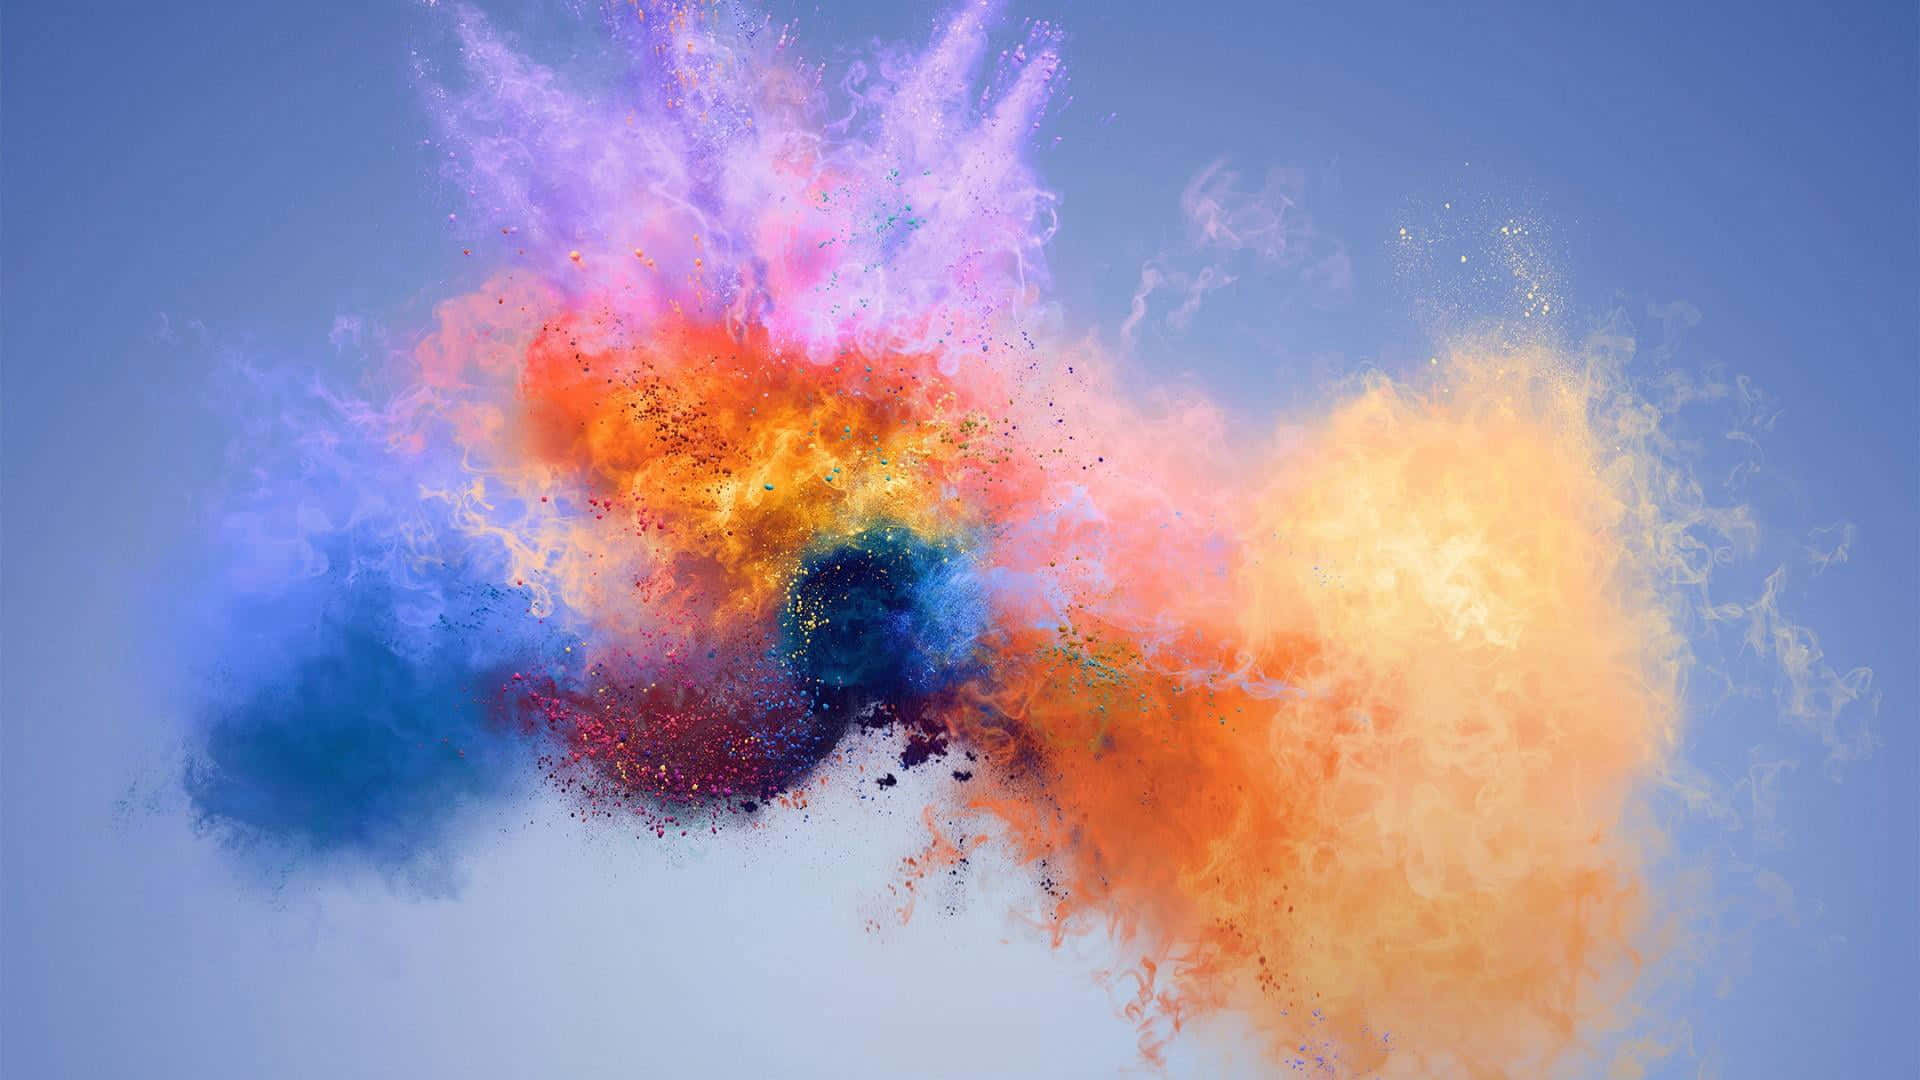 Breathe in and Take in the Colorful Smoke Wallpaper